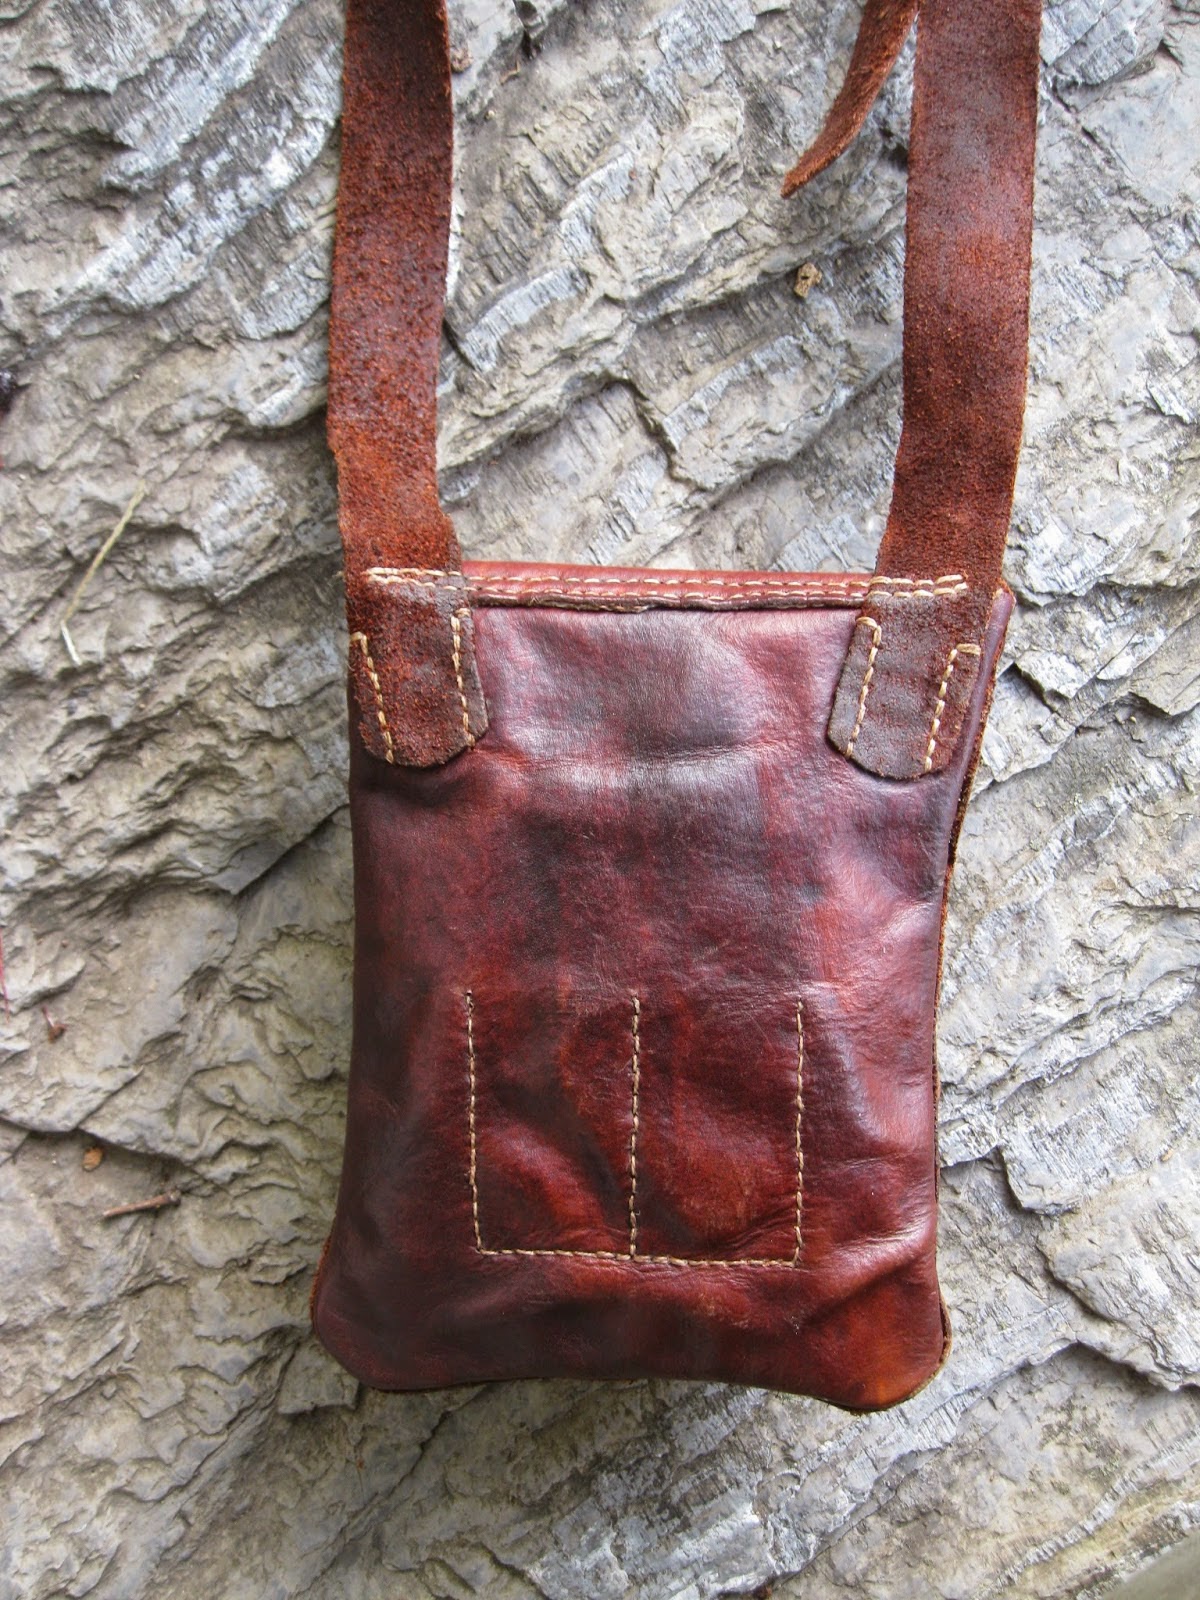 Contemporary Makers: Hunting Pouch by Eric Ewing